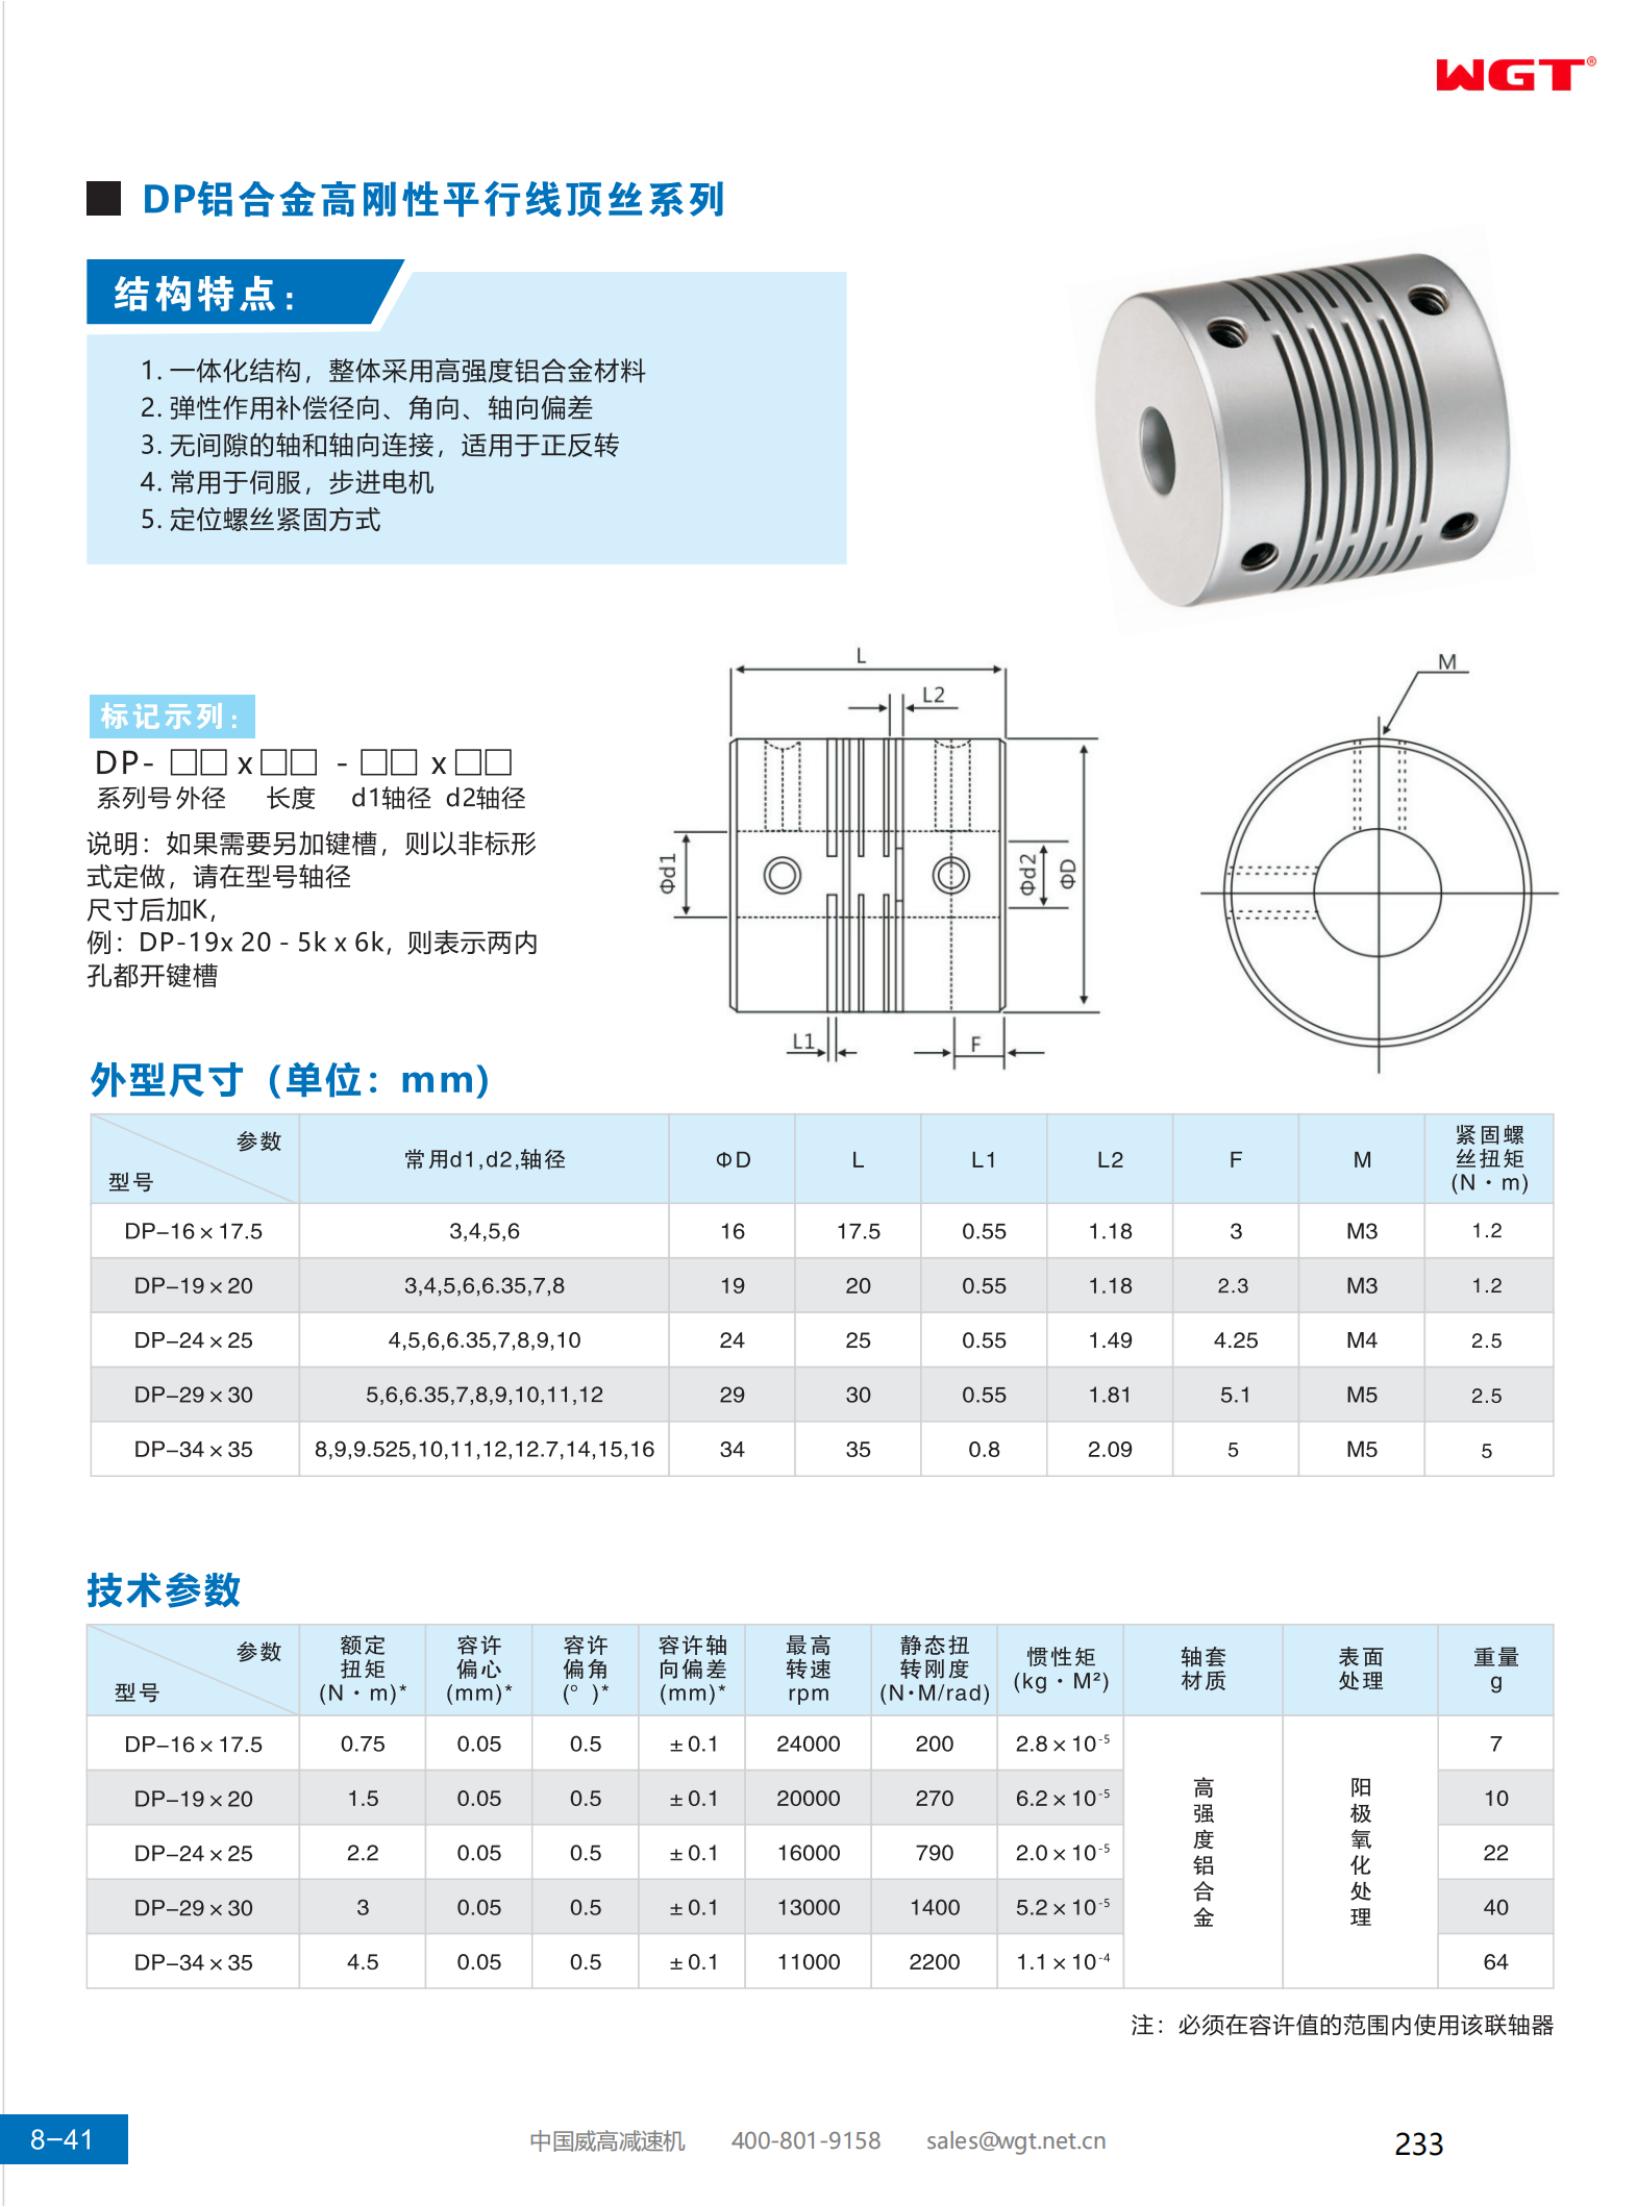 DP aluminum alloy high rigidity parallel wire top wire series